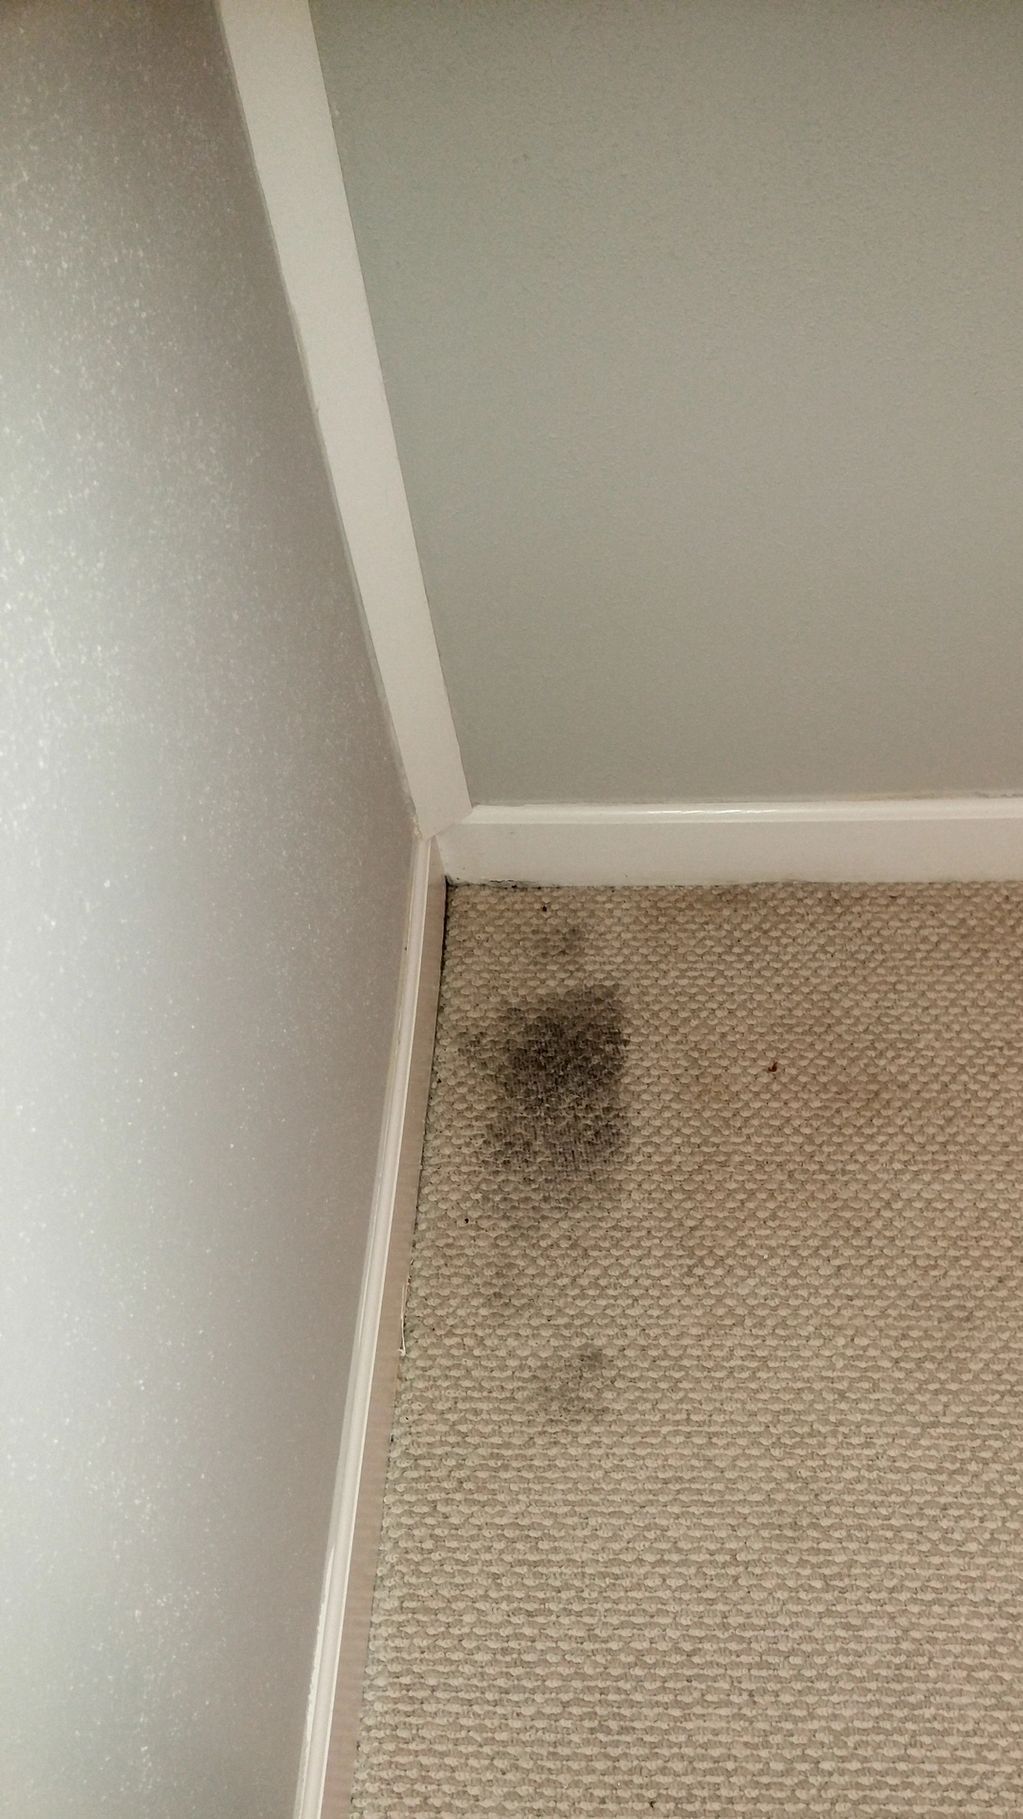 Stain in customers berber carpet before carpet cleaning 